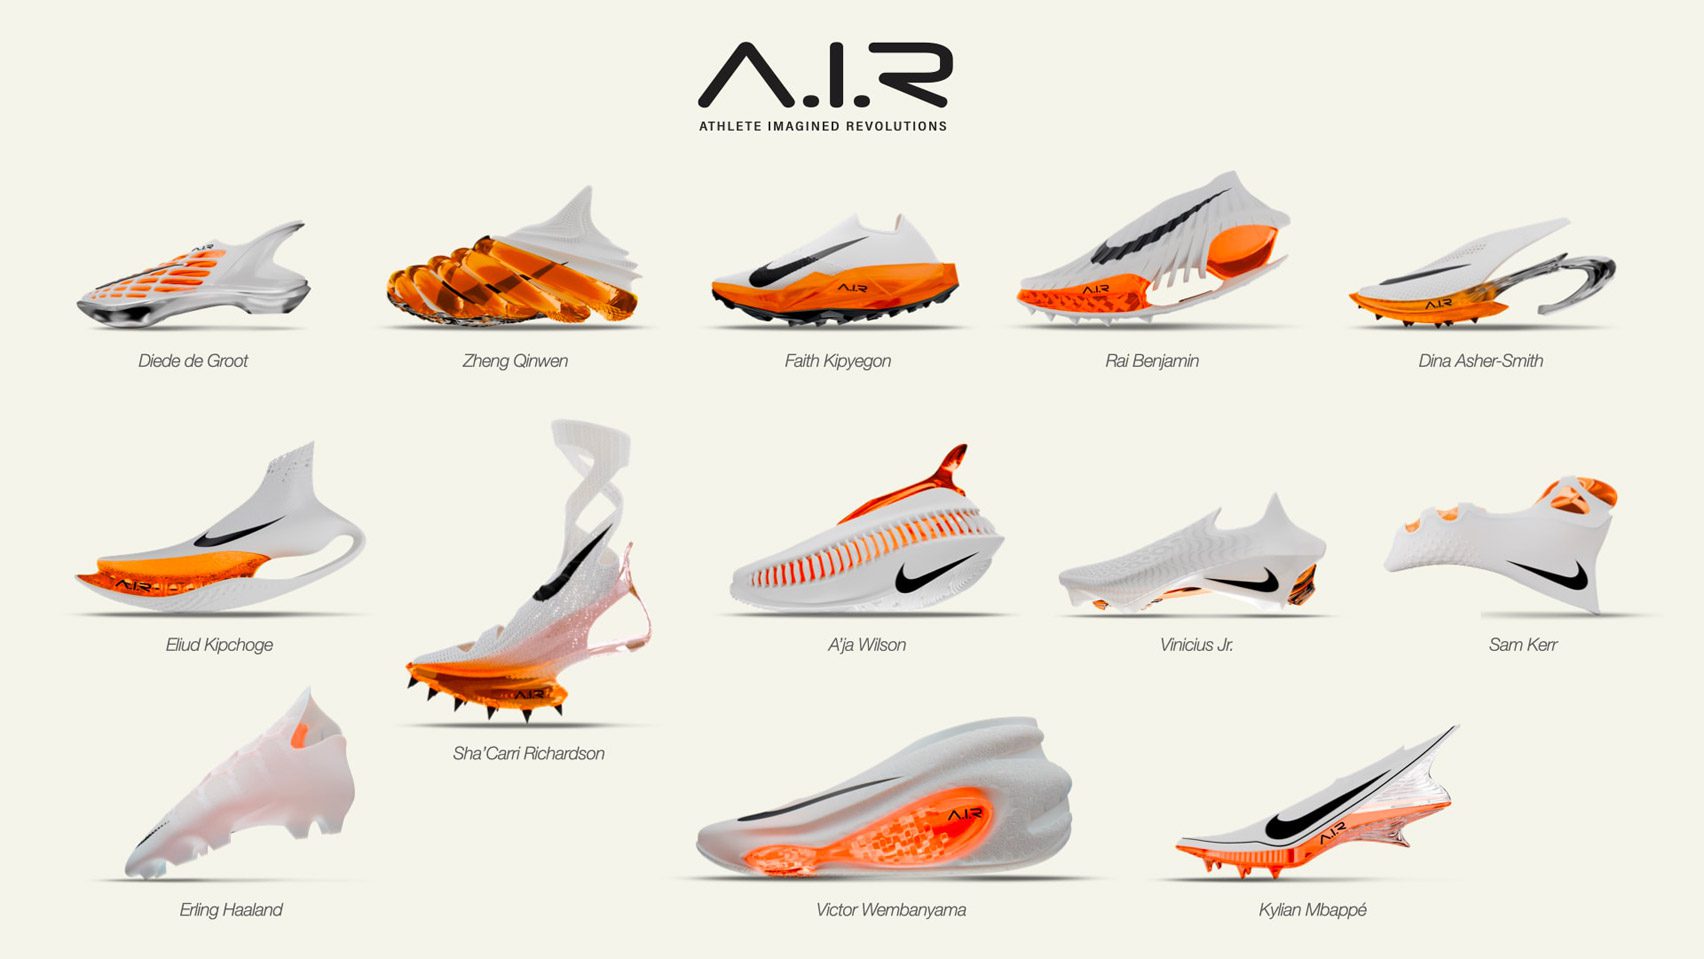 All 13 Nike AIR prototypes